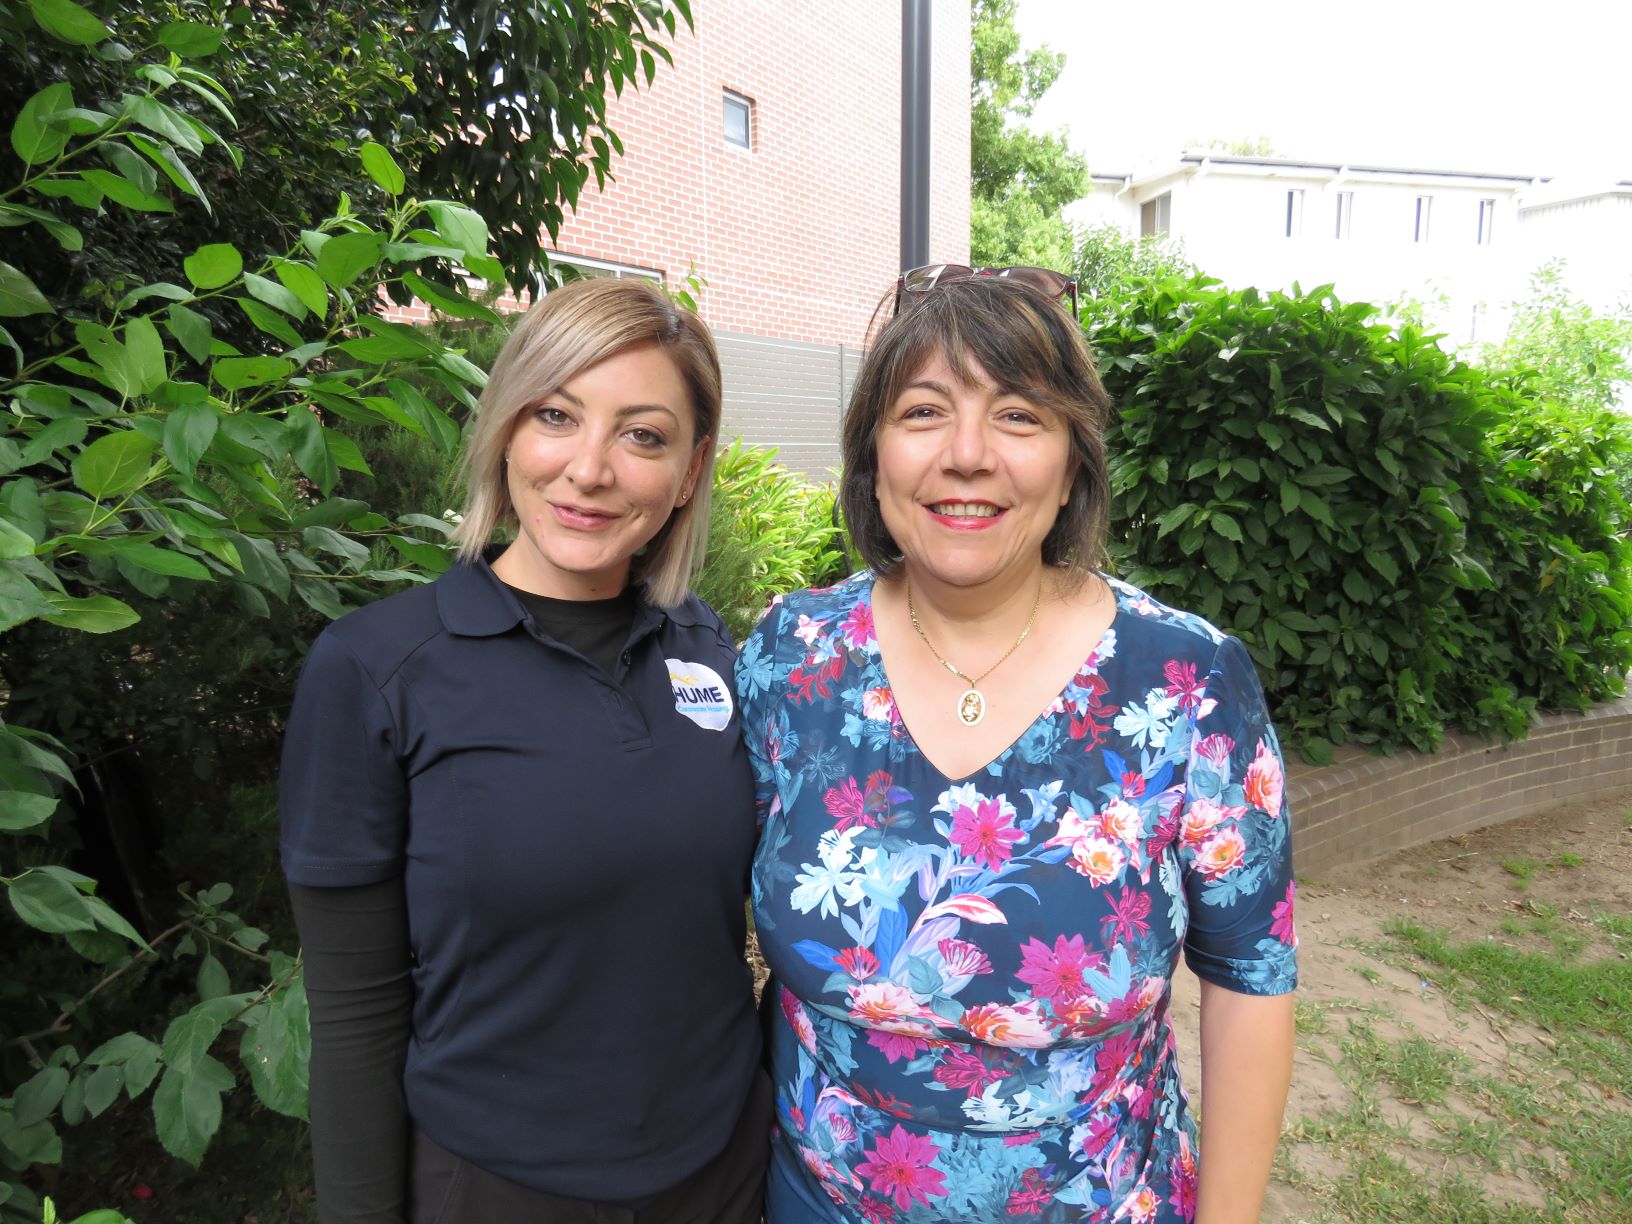 Hume Community Housing’s Jasmine Tarabay with Sonia Arinian, Armenian community advocate for social and Affordable customers within the Armenian community in Telopea